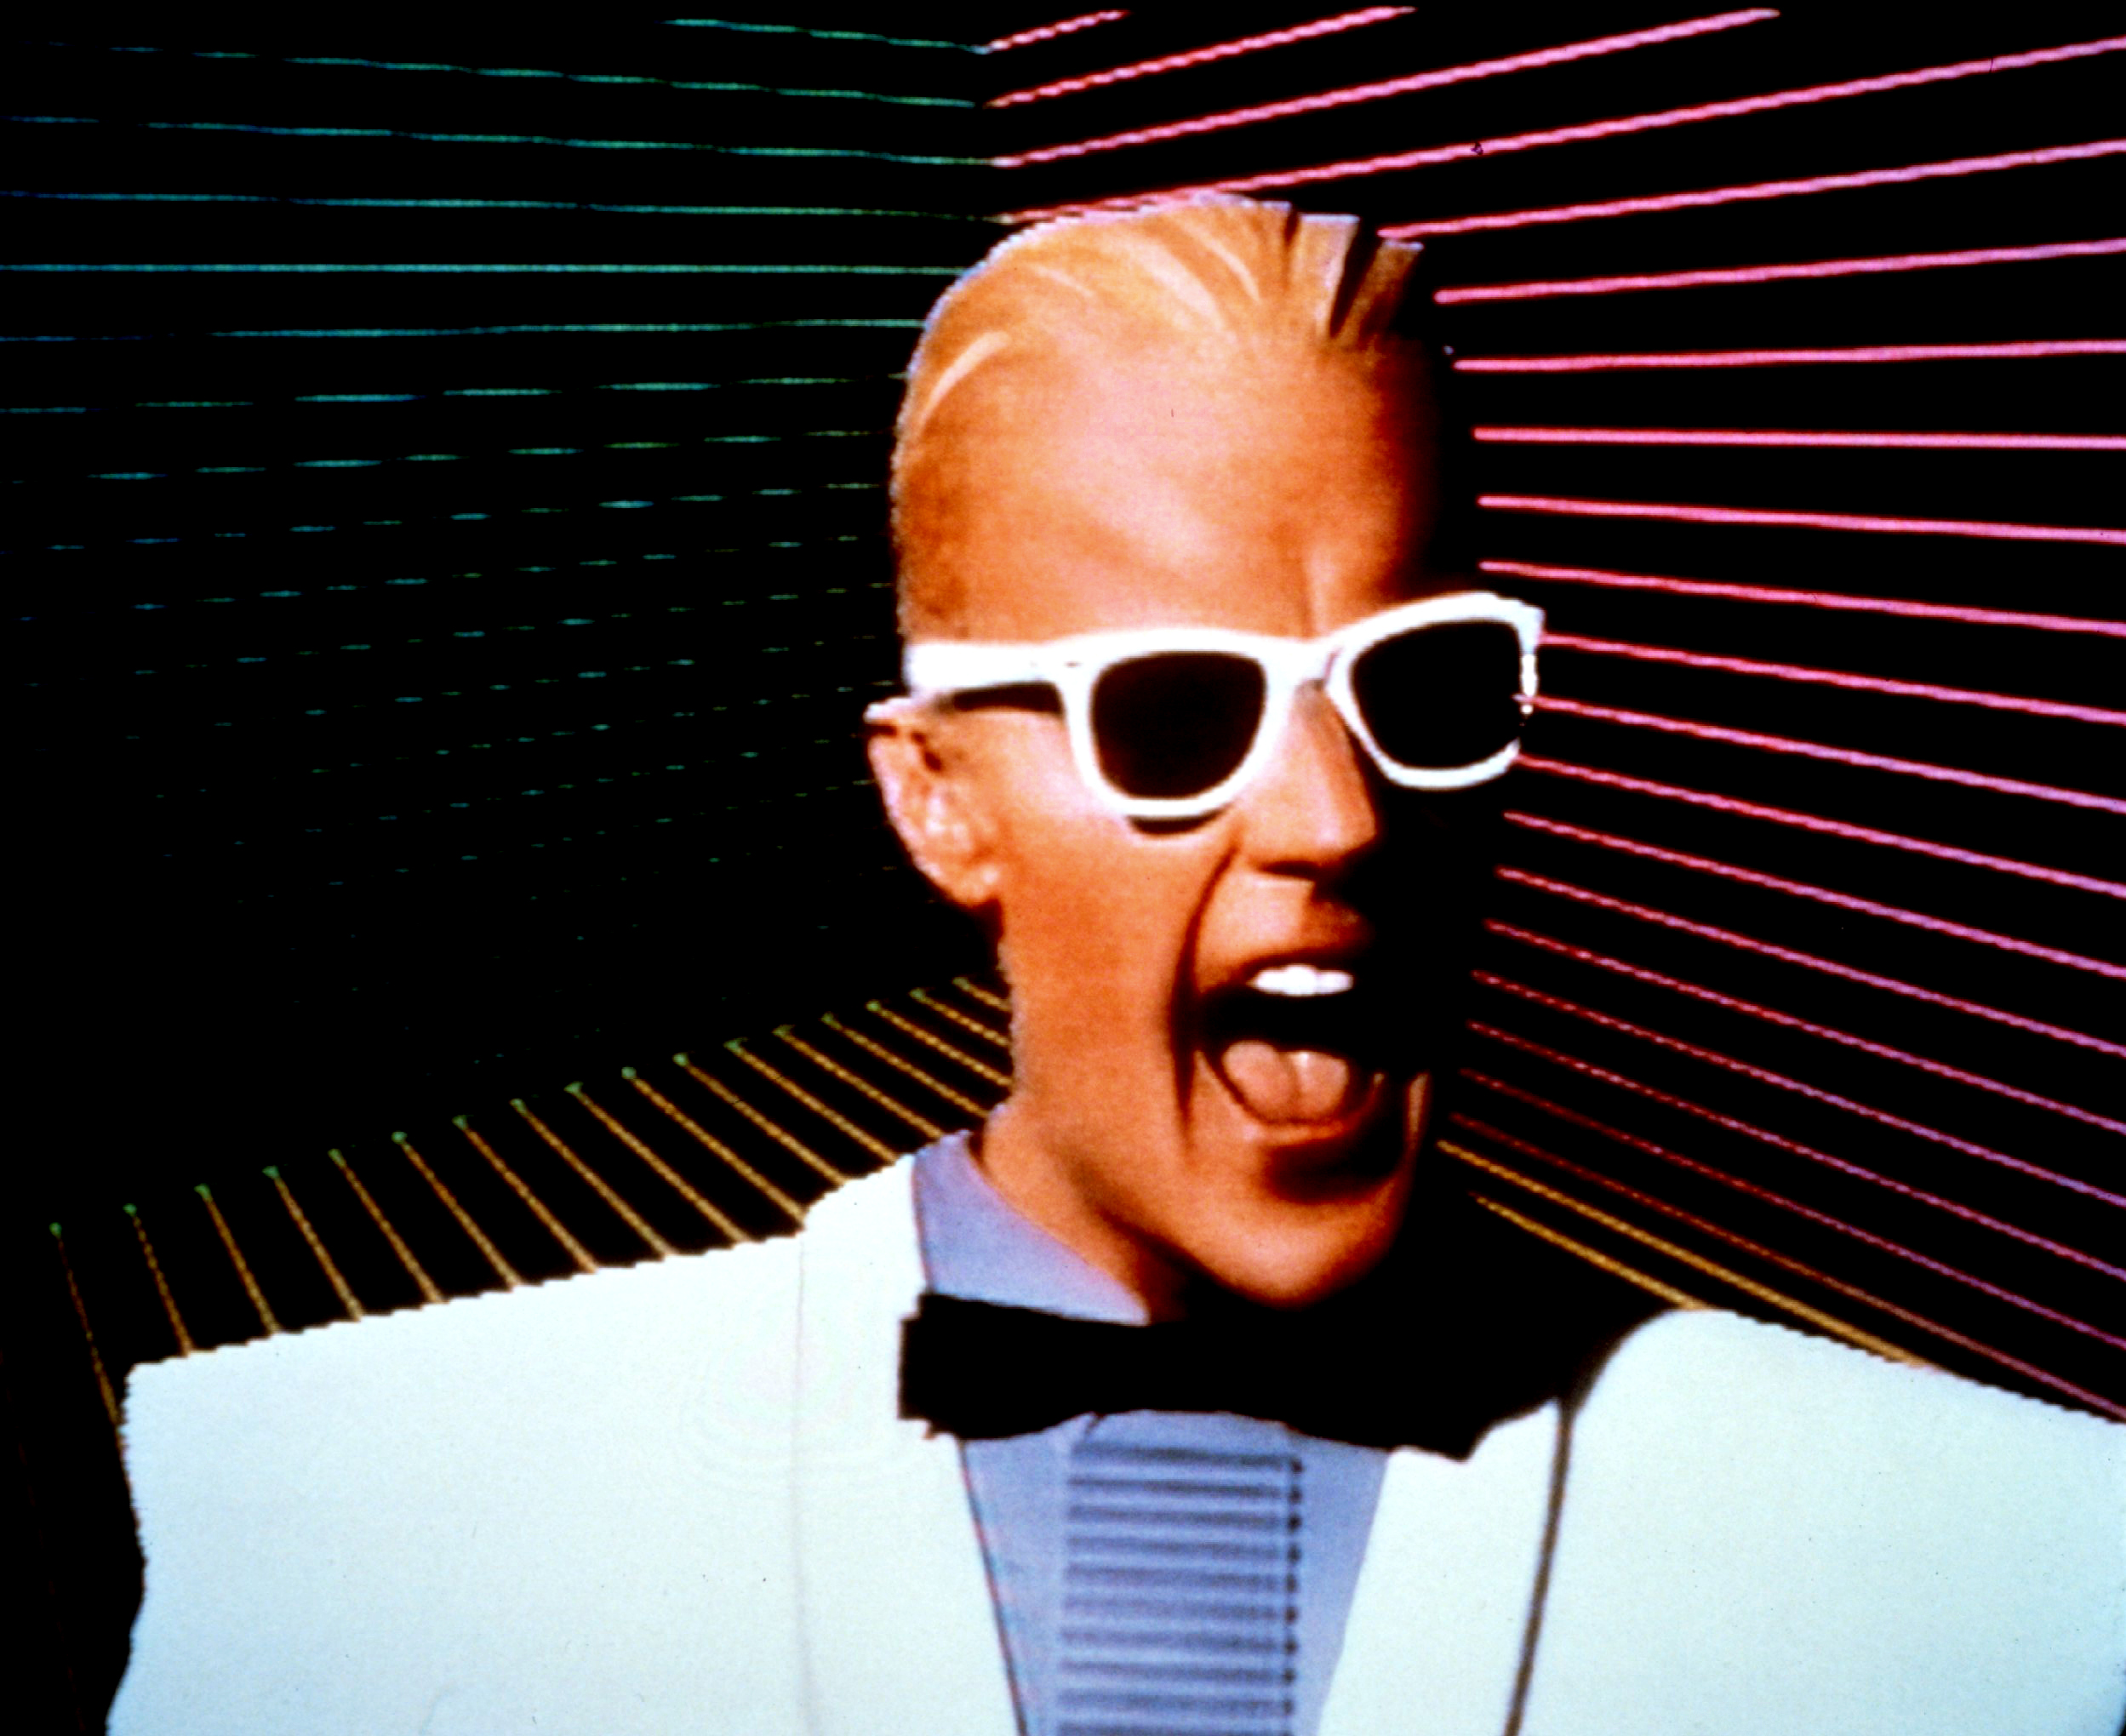 Max Headroom Backgrounds, Compatible - PC, Mobile, Gadgets| 2498x2040 px